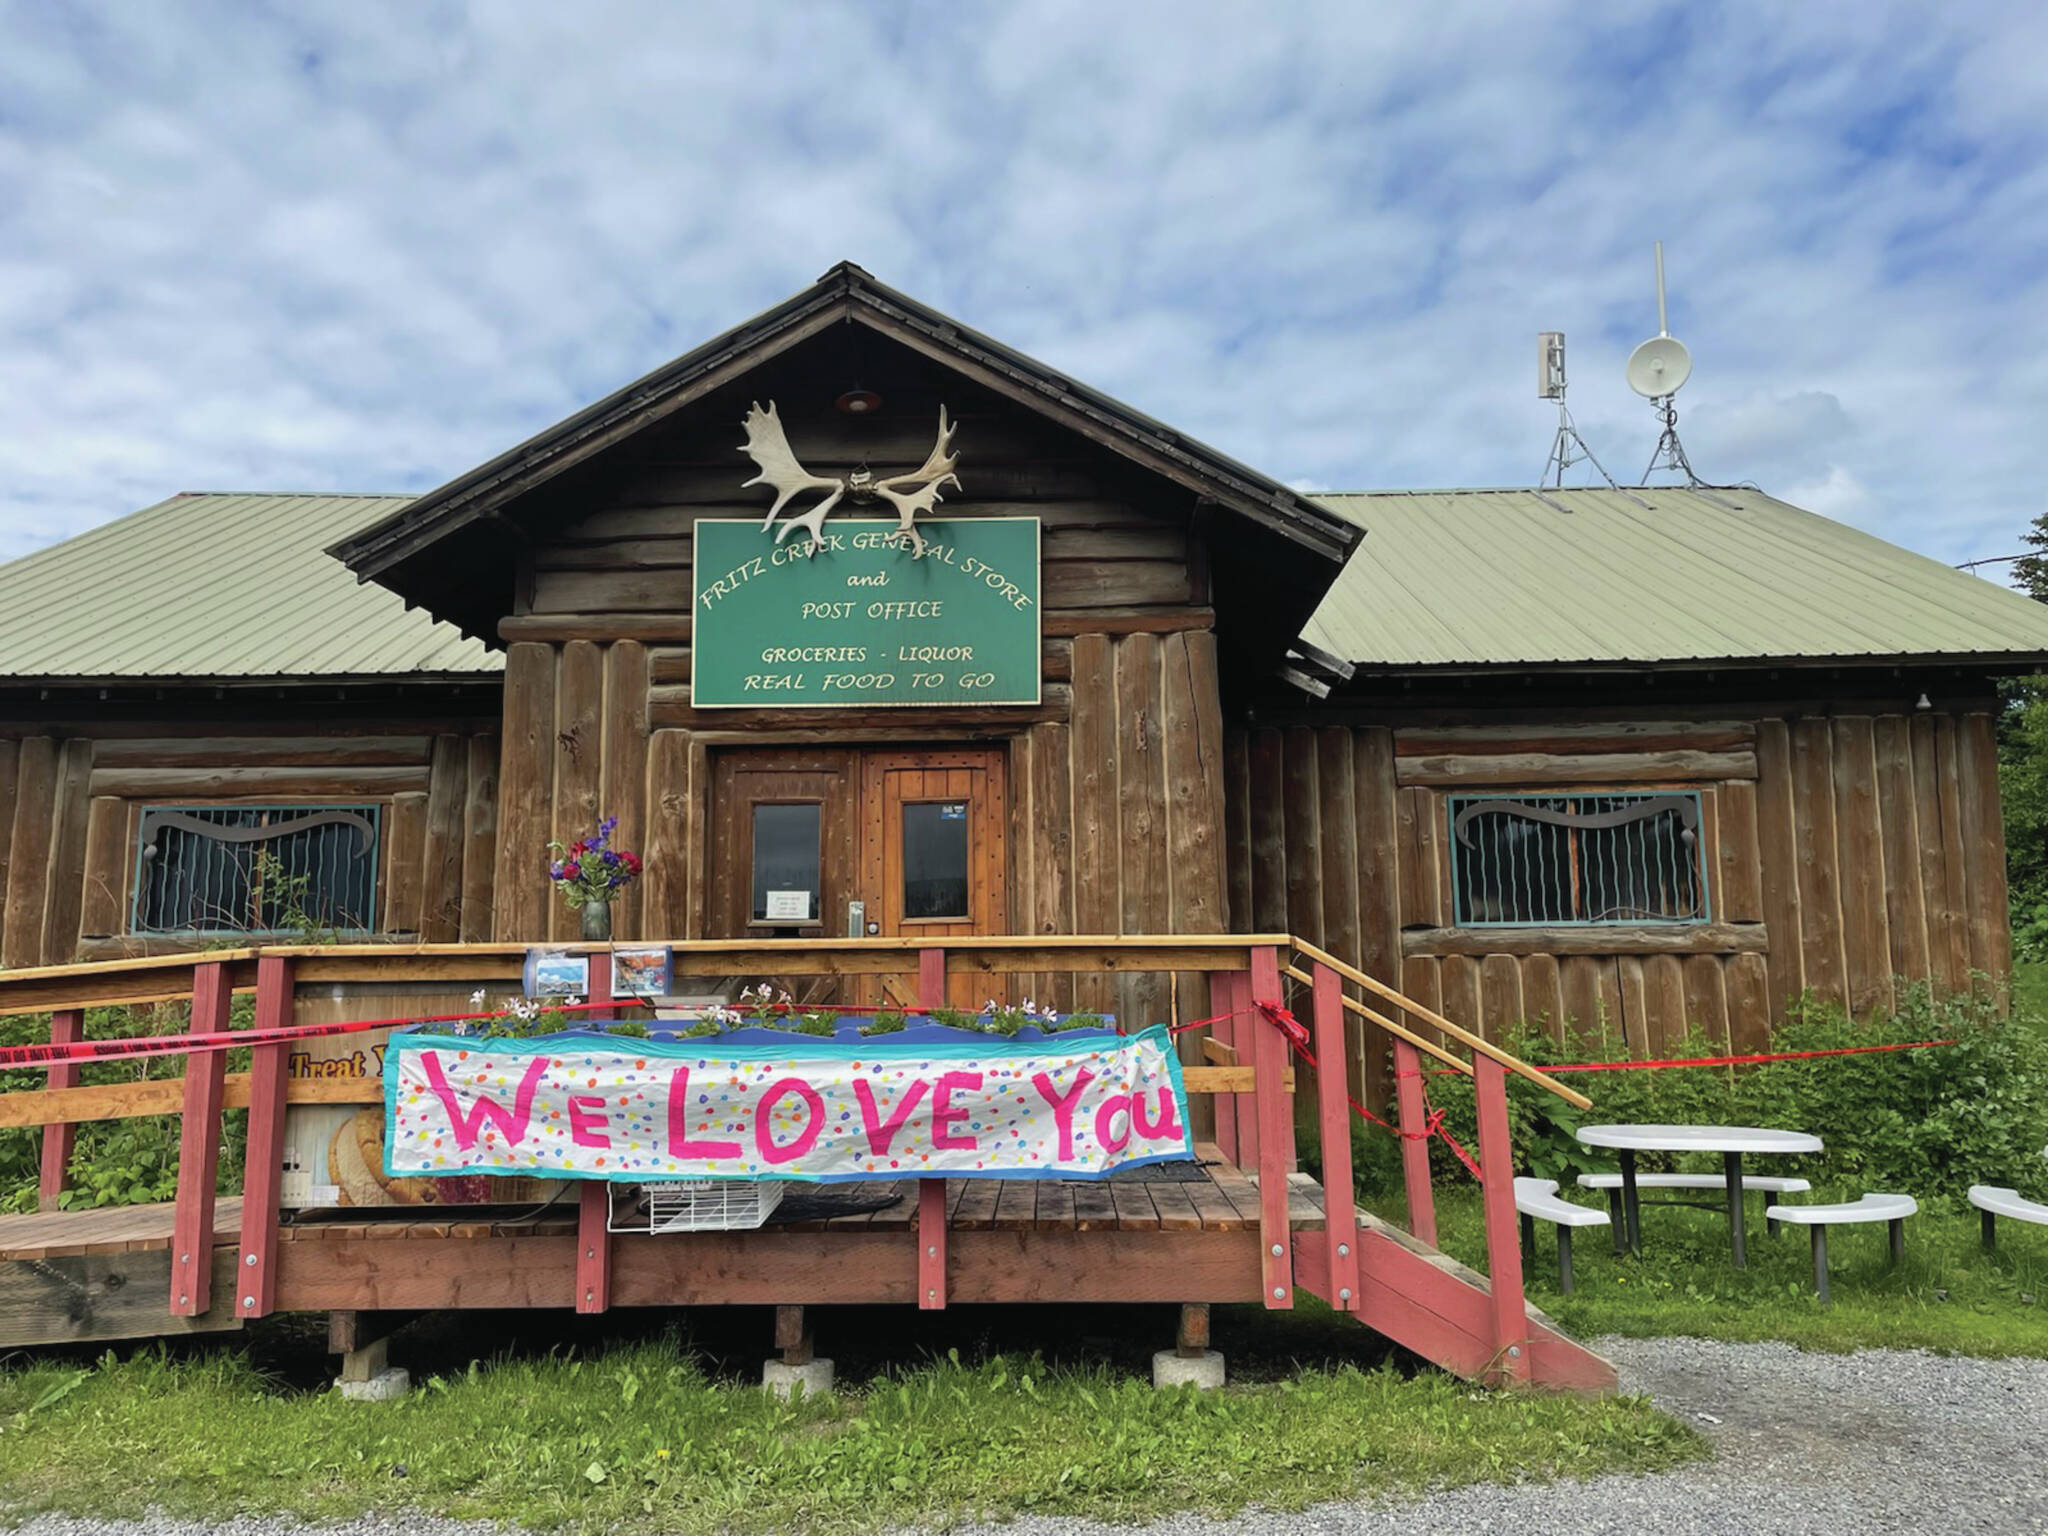 Emilie Springer/Homer News
A sign on Saturday, July 8<ins>, 2023,</ins> reading “We love you” expresses community support for the Fritz Creek General Store after a fire severely damaged it on Thursday, July 6.